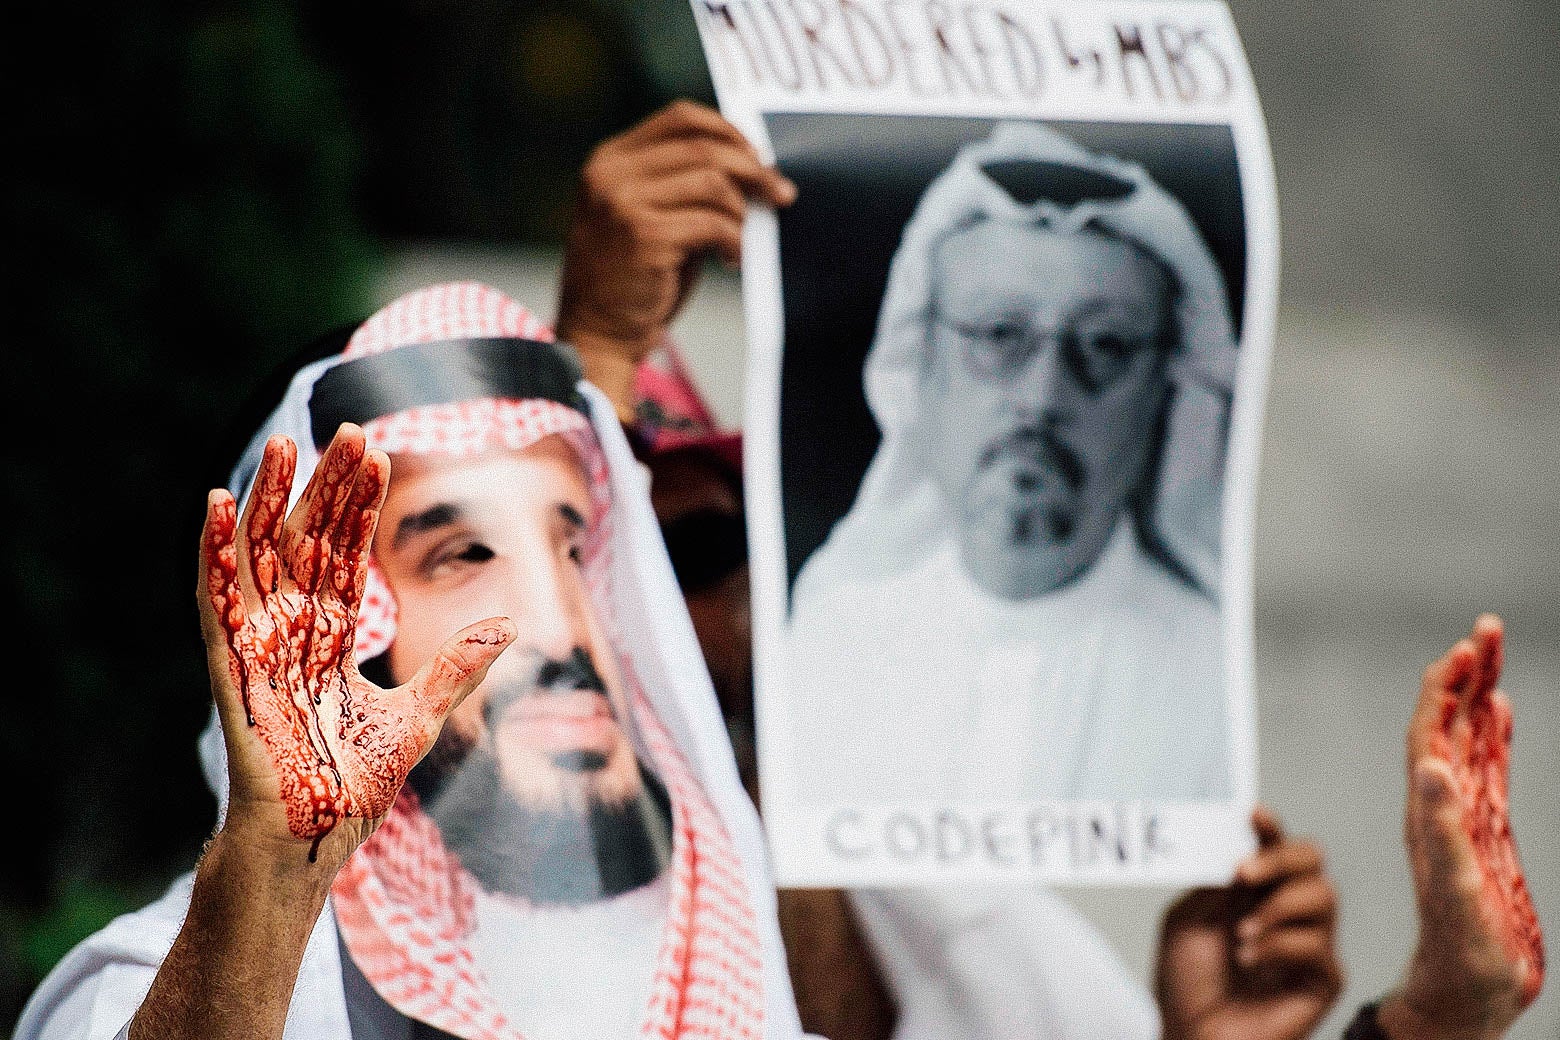 A demonstrator dressed as Saudi Arabian Crown Prince Mohammed Bin Salman with blood on his hands protests outside the Saudi Embassy in D.C.